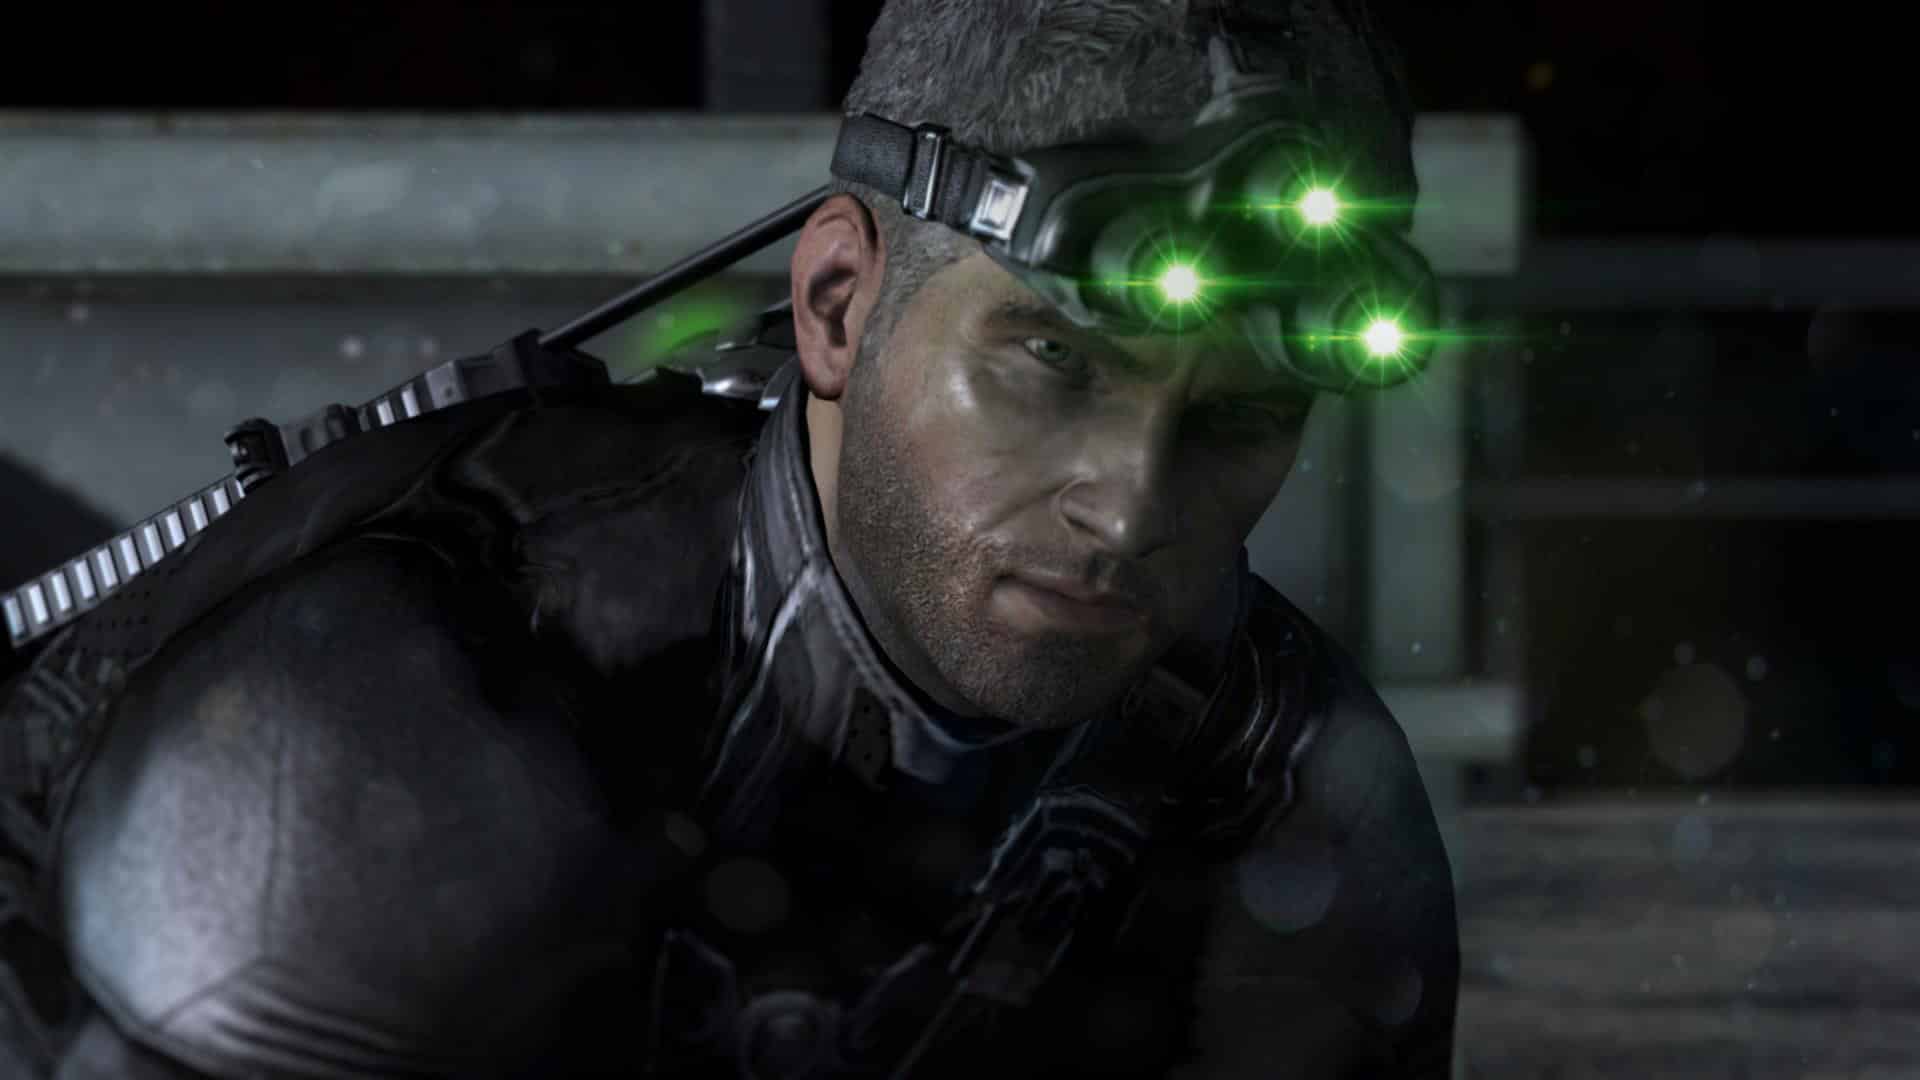 Review: 'Splinter Cell' rewards fans of stealth games